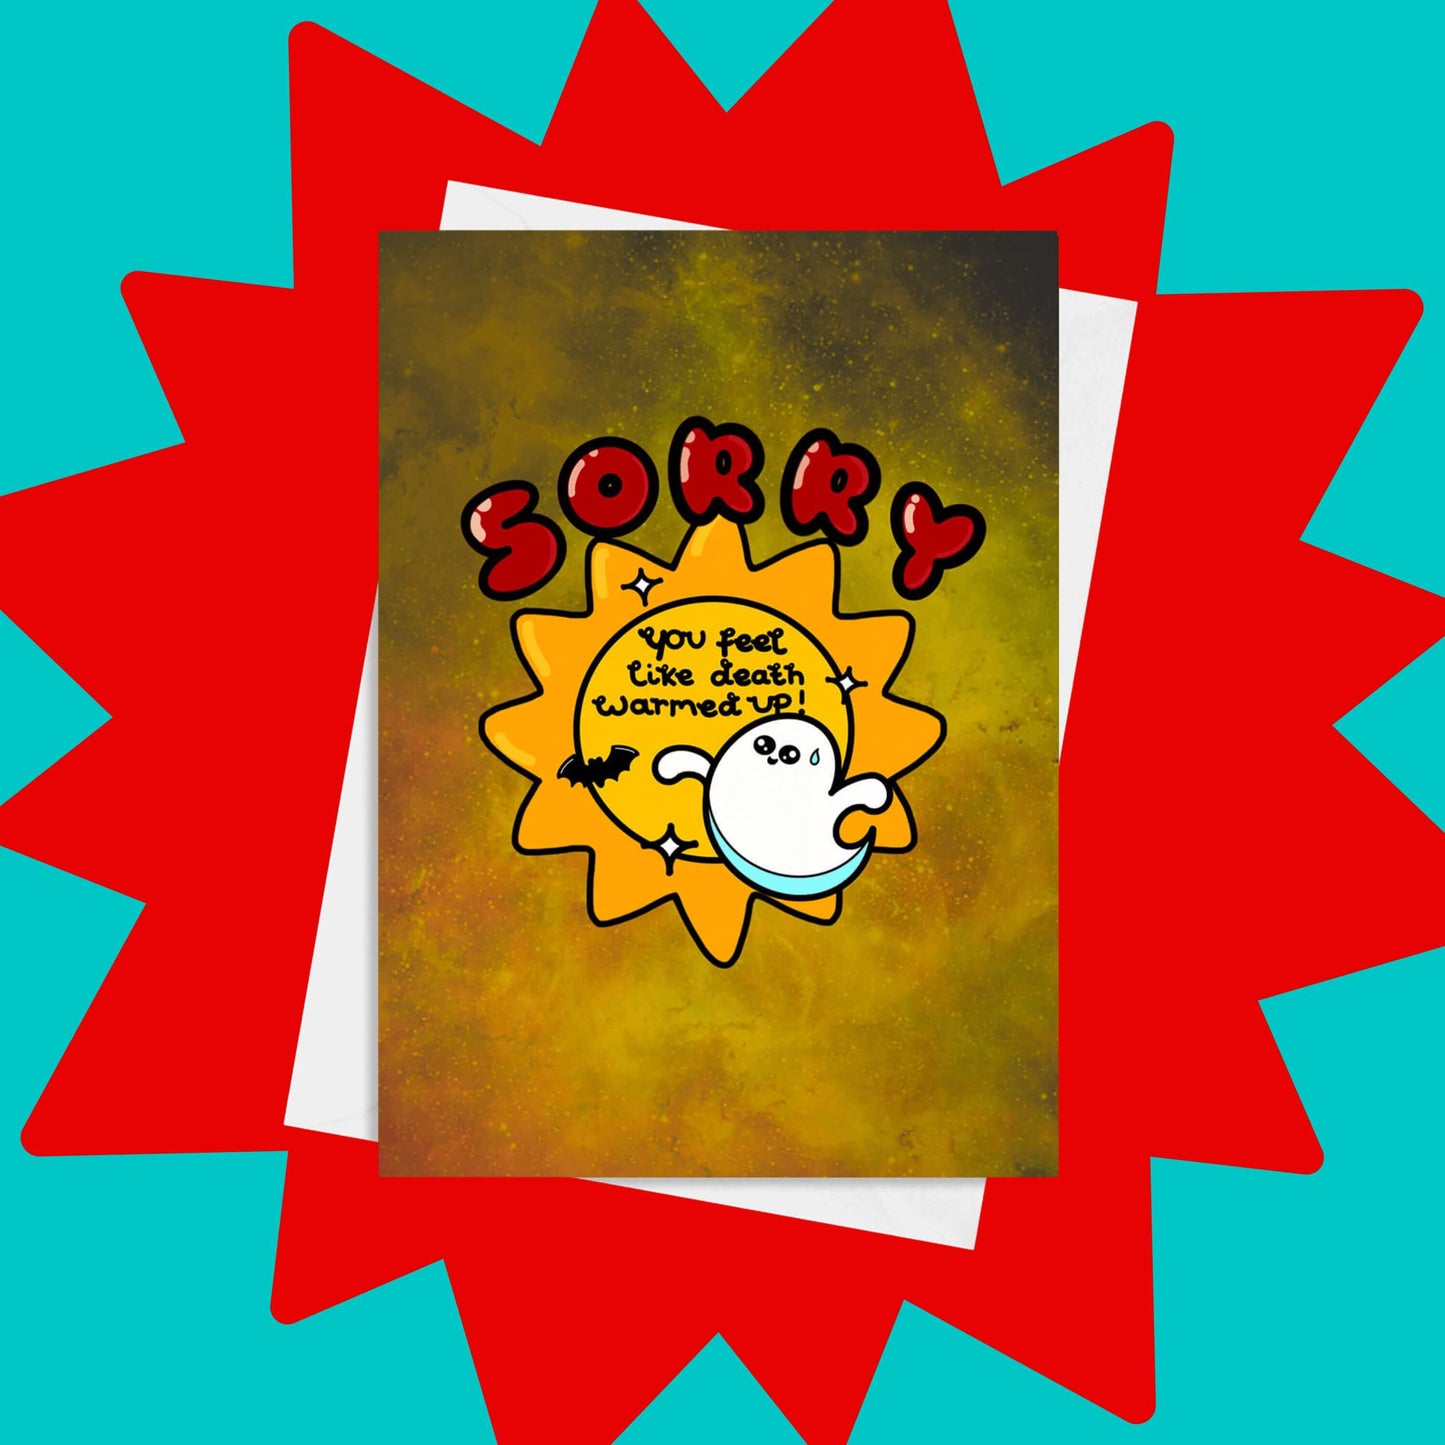 A yellow greeting card with black paint splatters. 'Sorry' is written in big red letters above an illustration of a sun with 'You feel like death warmed up!' inside. there are also sparkles, a sweating ghost and a bat around the sun. The card is on a red and blue background with a white envelope. The spooky design is inspired by get well soon cards.